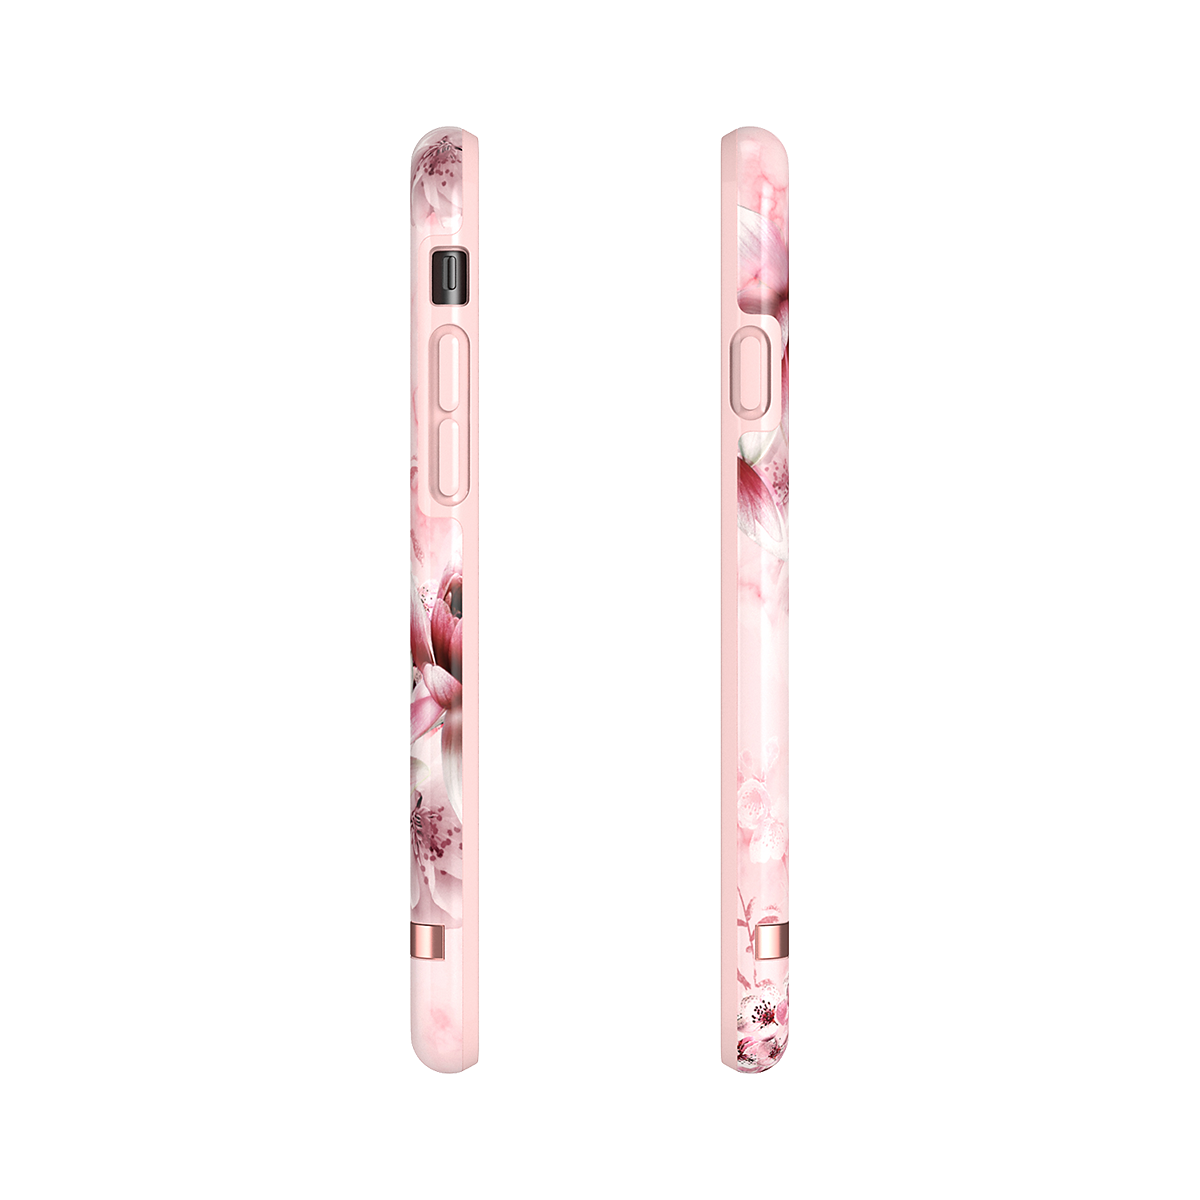 Richmond & Finch, Pink Marble Floral, skal för iPhone 6/6s/7/8